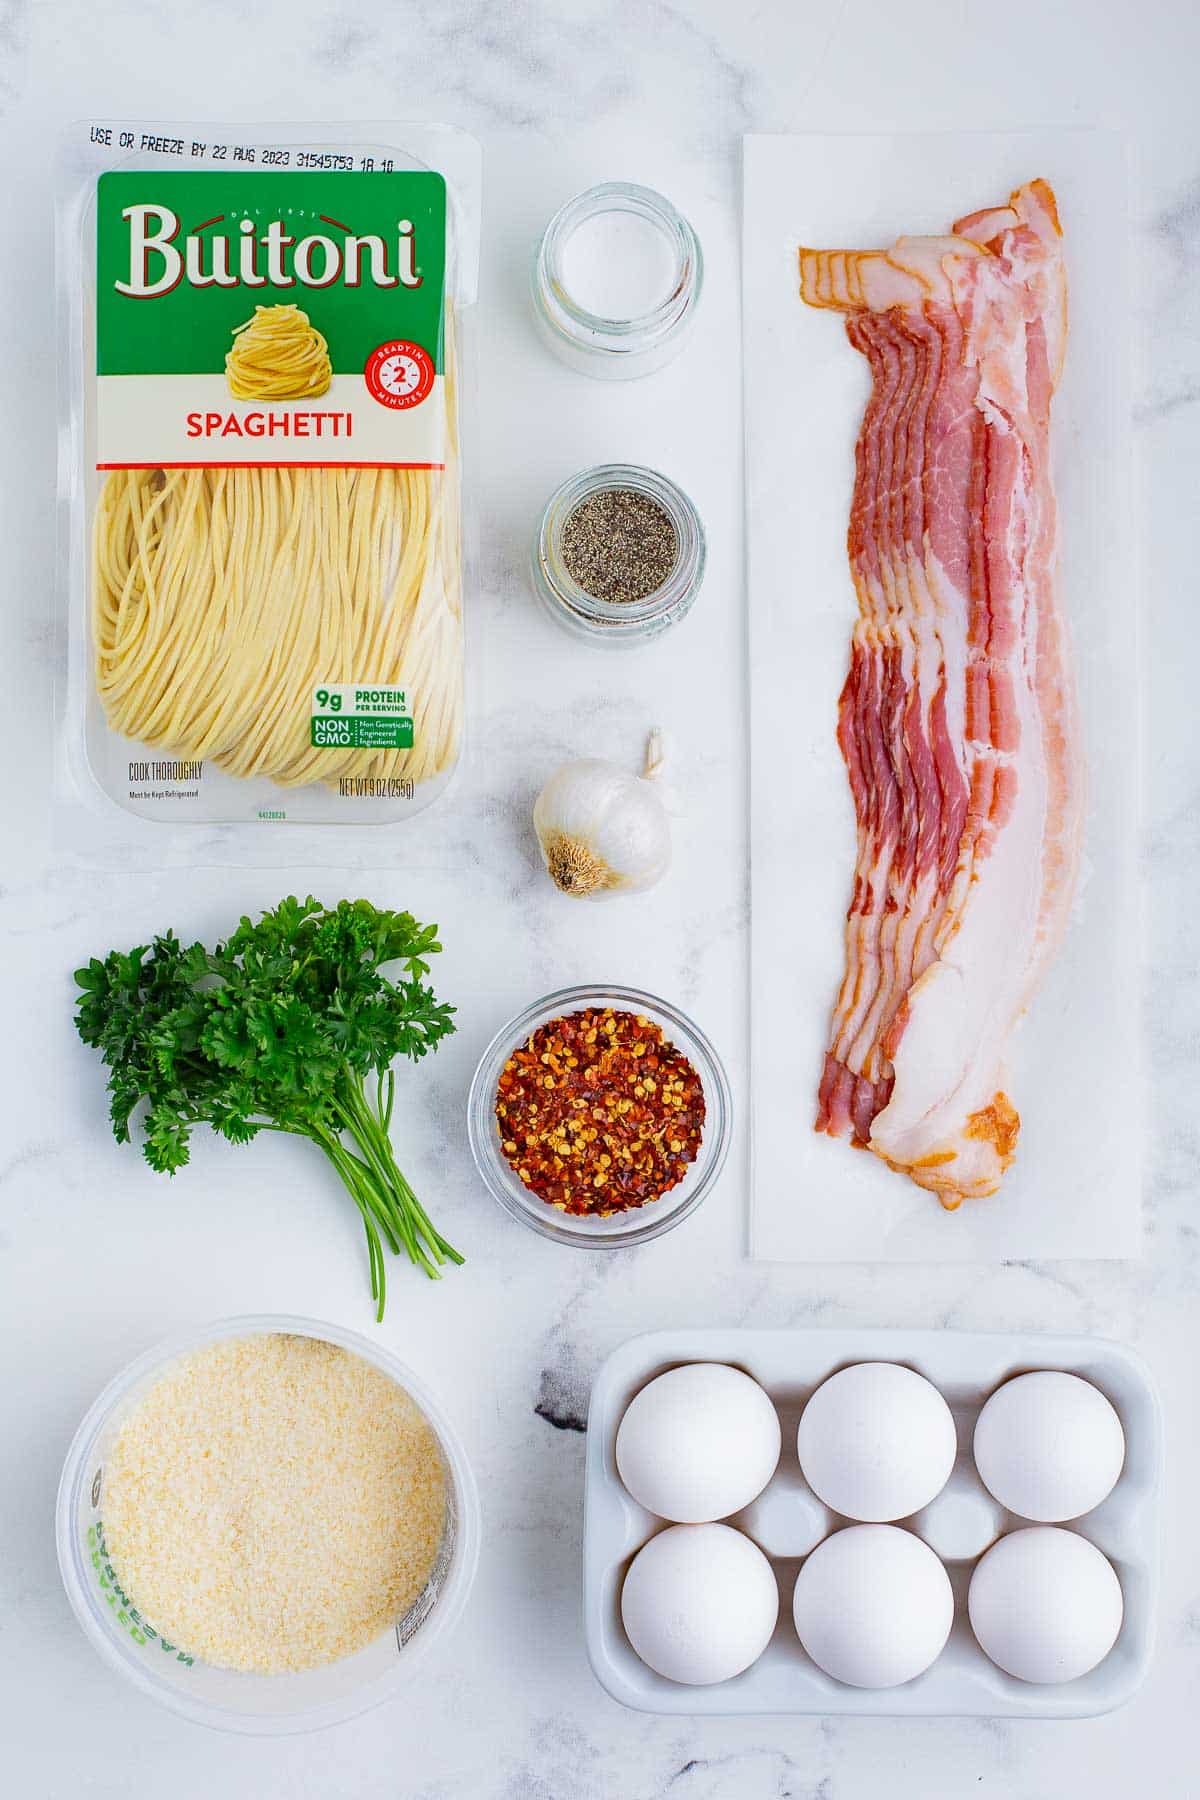 Noodles, bacon, eggs, cheese, and herbs are the ingredients for this dish.